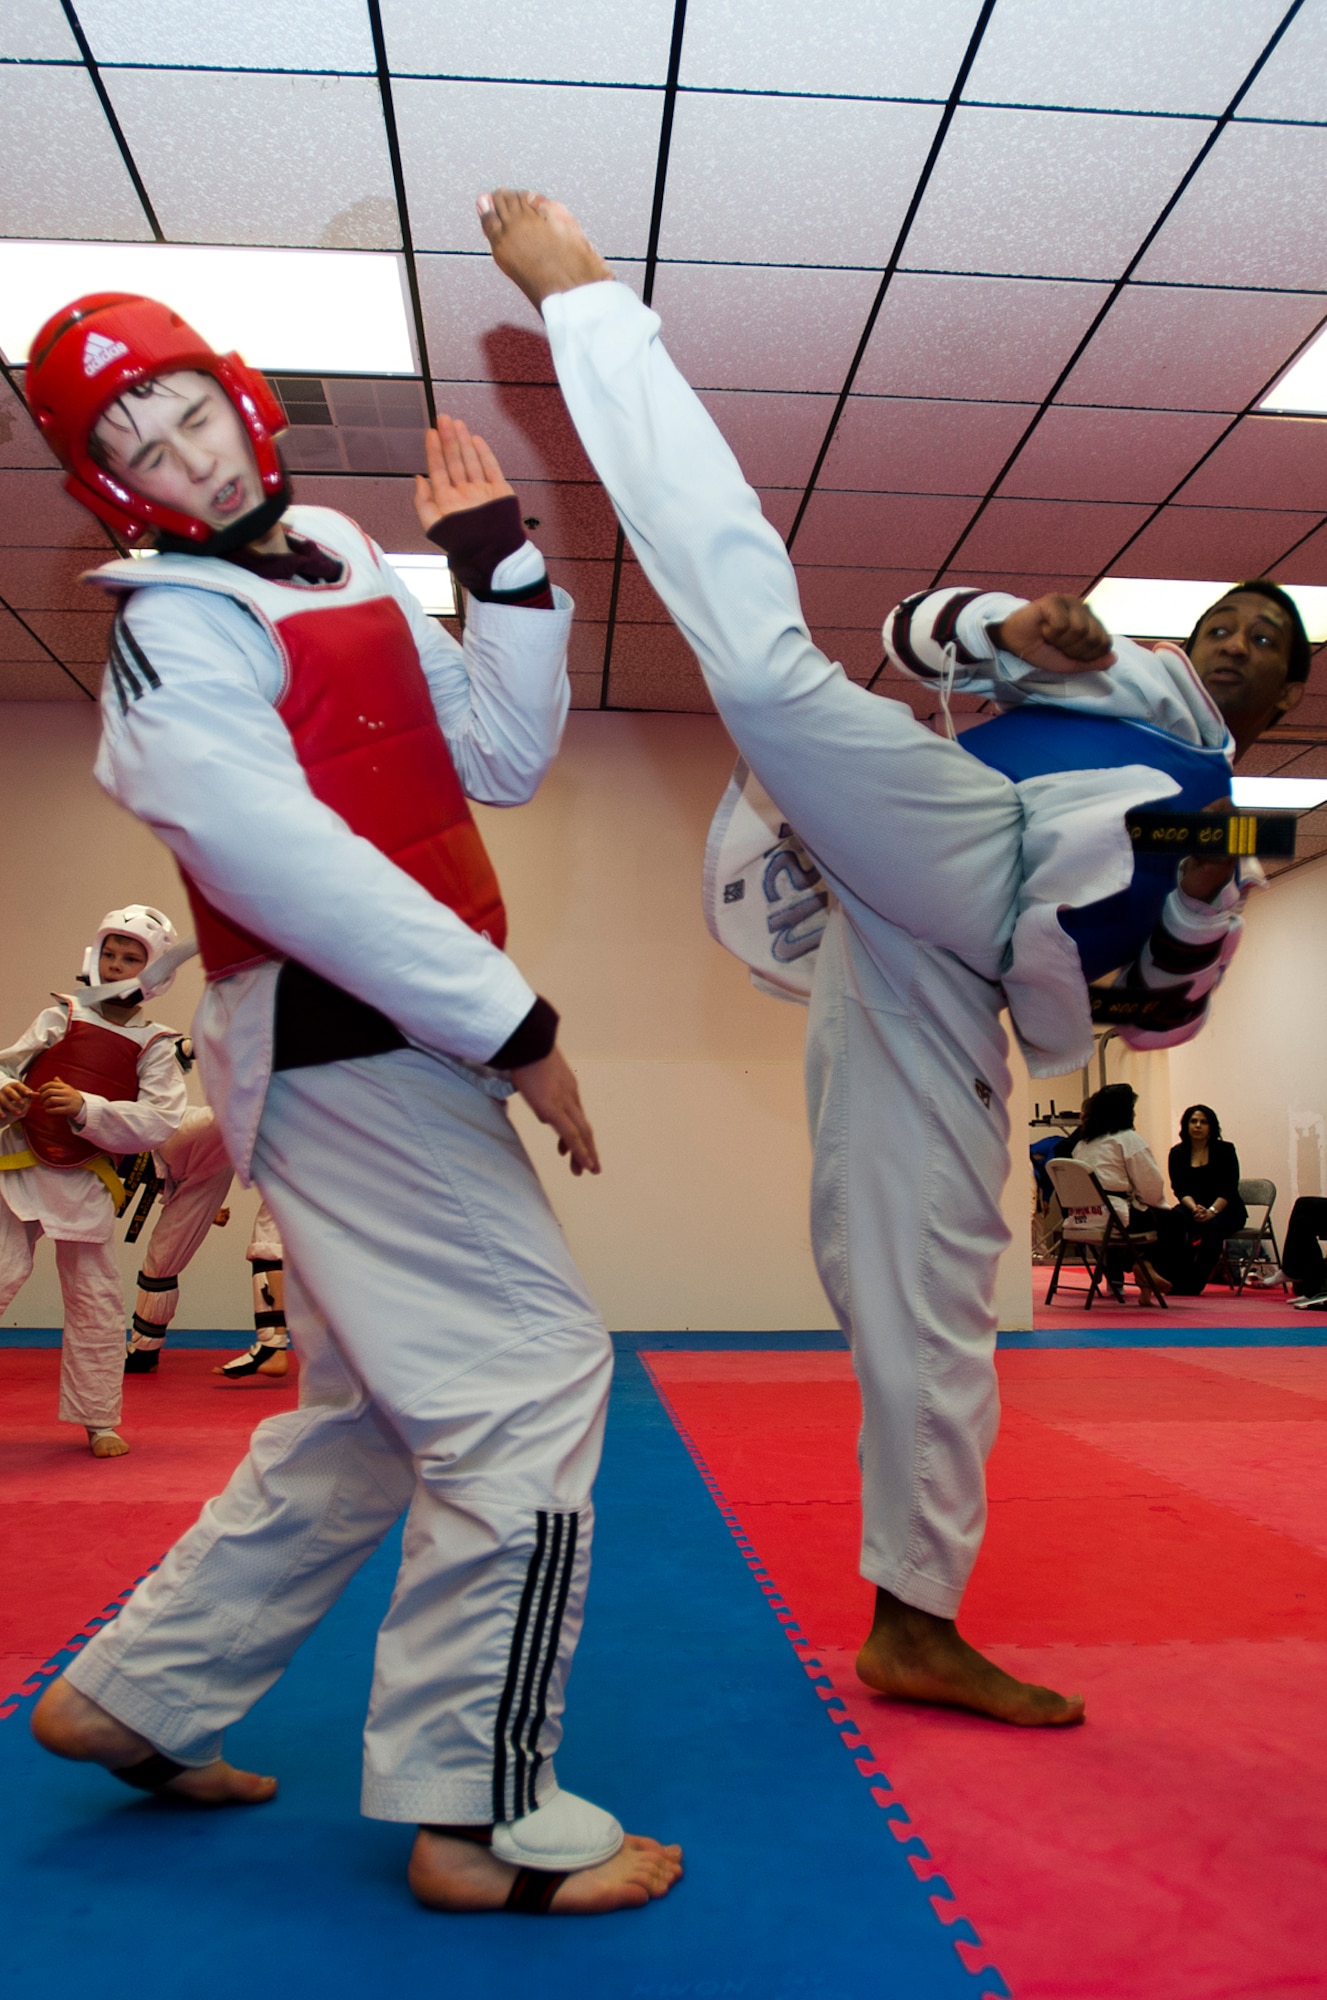 Tech. Sgt. Quinton Beach trains during a Taekwondo Elite USA class in Anchorage, March 7, 2014. Beach is a member of the United States Air Force Olympic Taekwondo team. (U.S. Air Force photo/Staff Sgt. Robert Barnett)